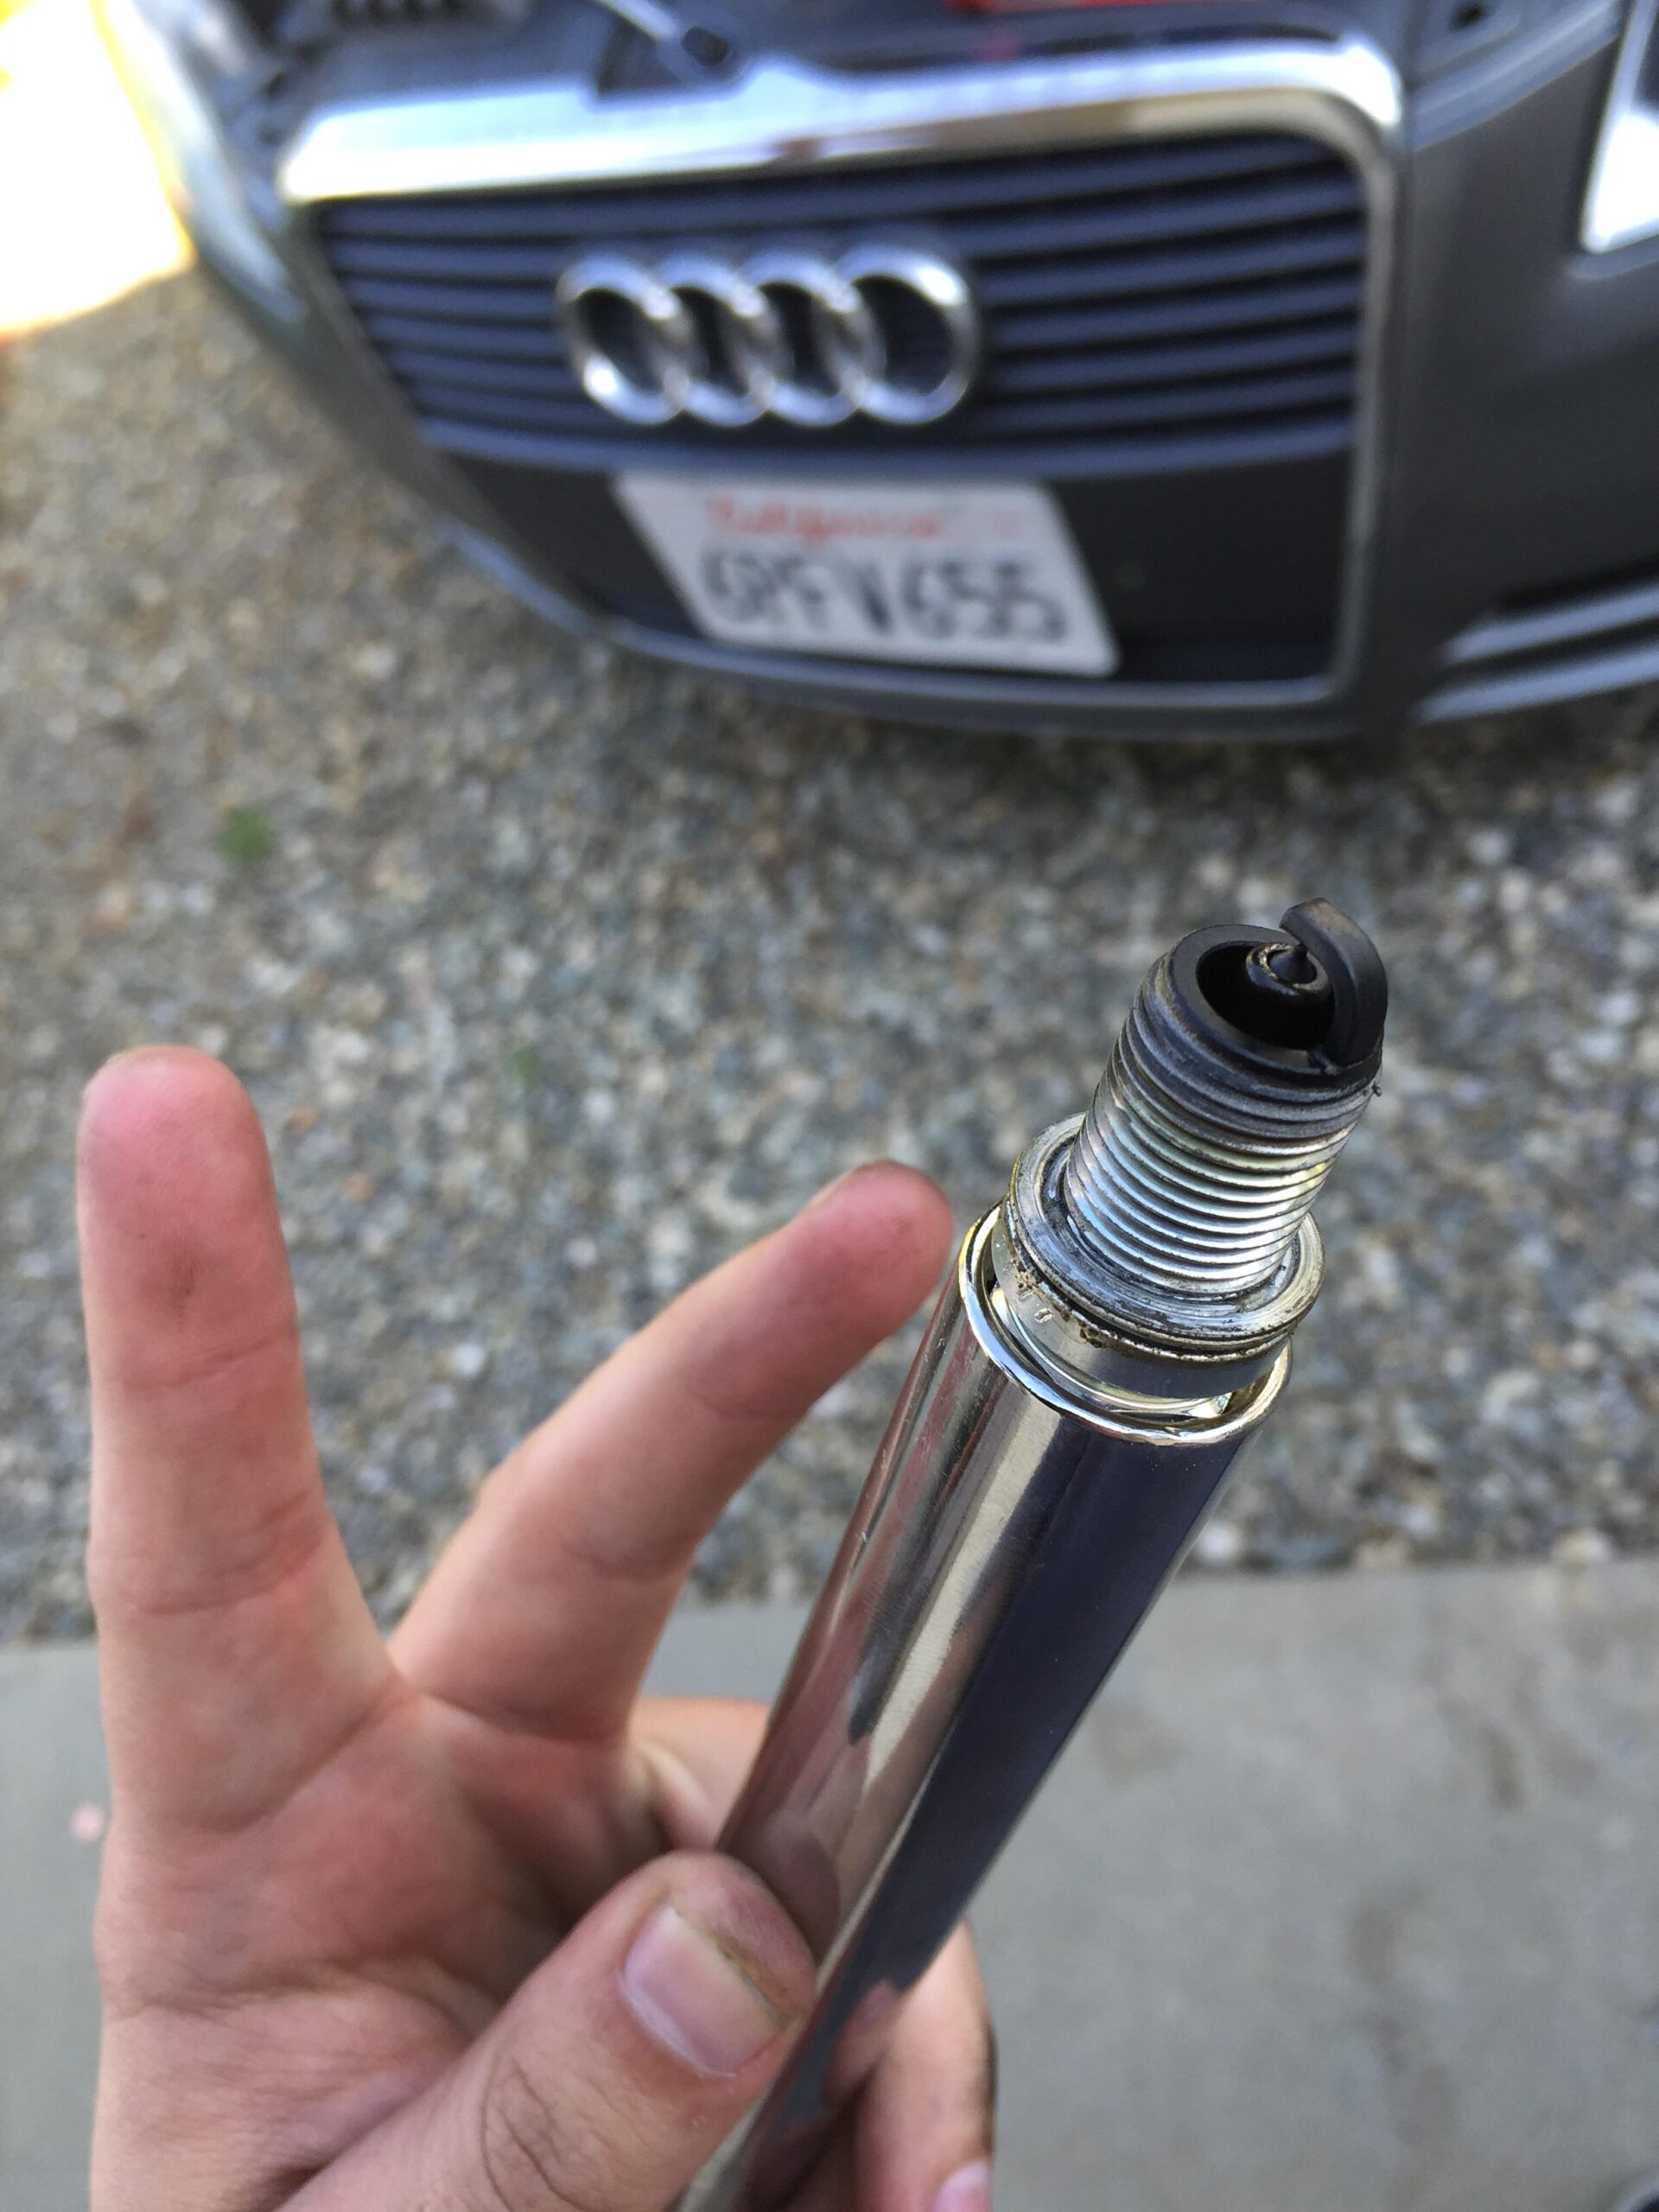 [SOLVED] Why Does My Spark Plug Smells Like Gas?